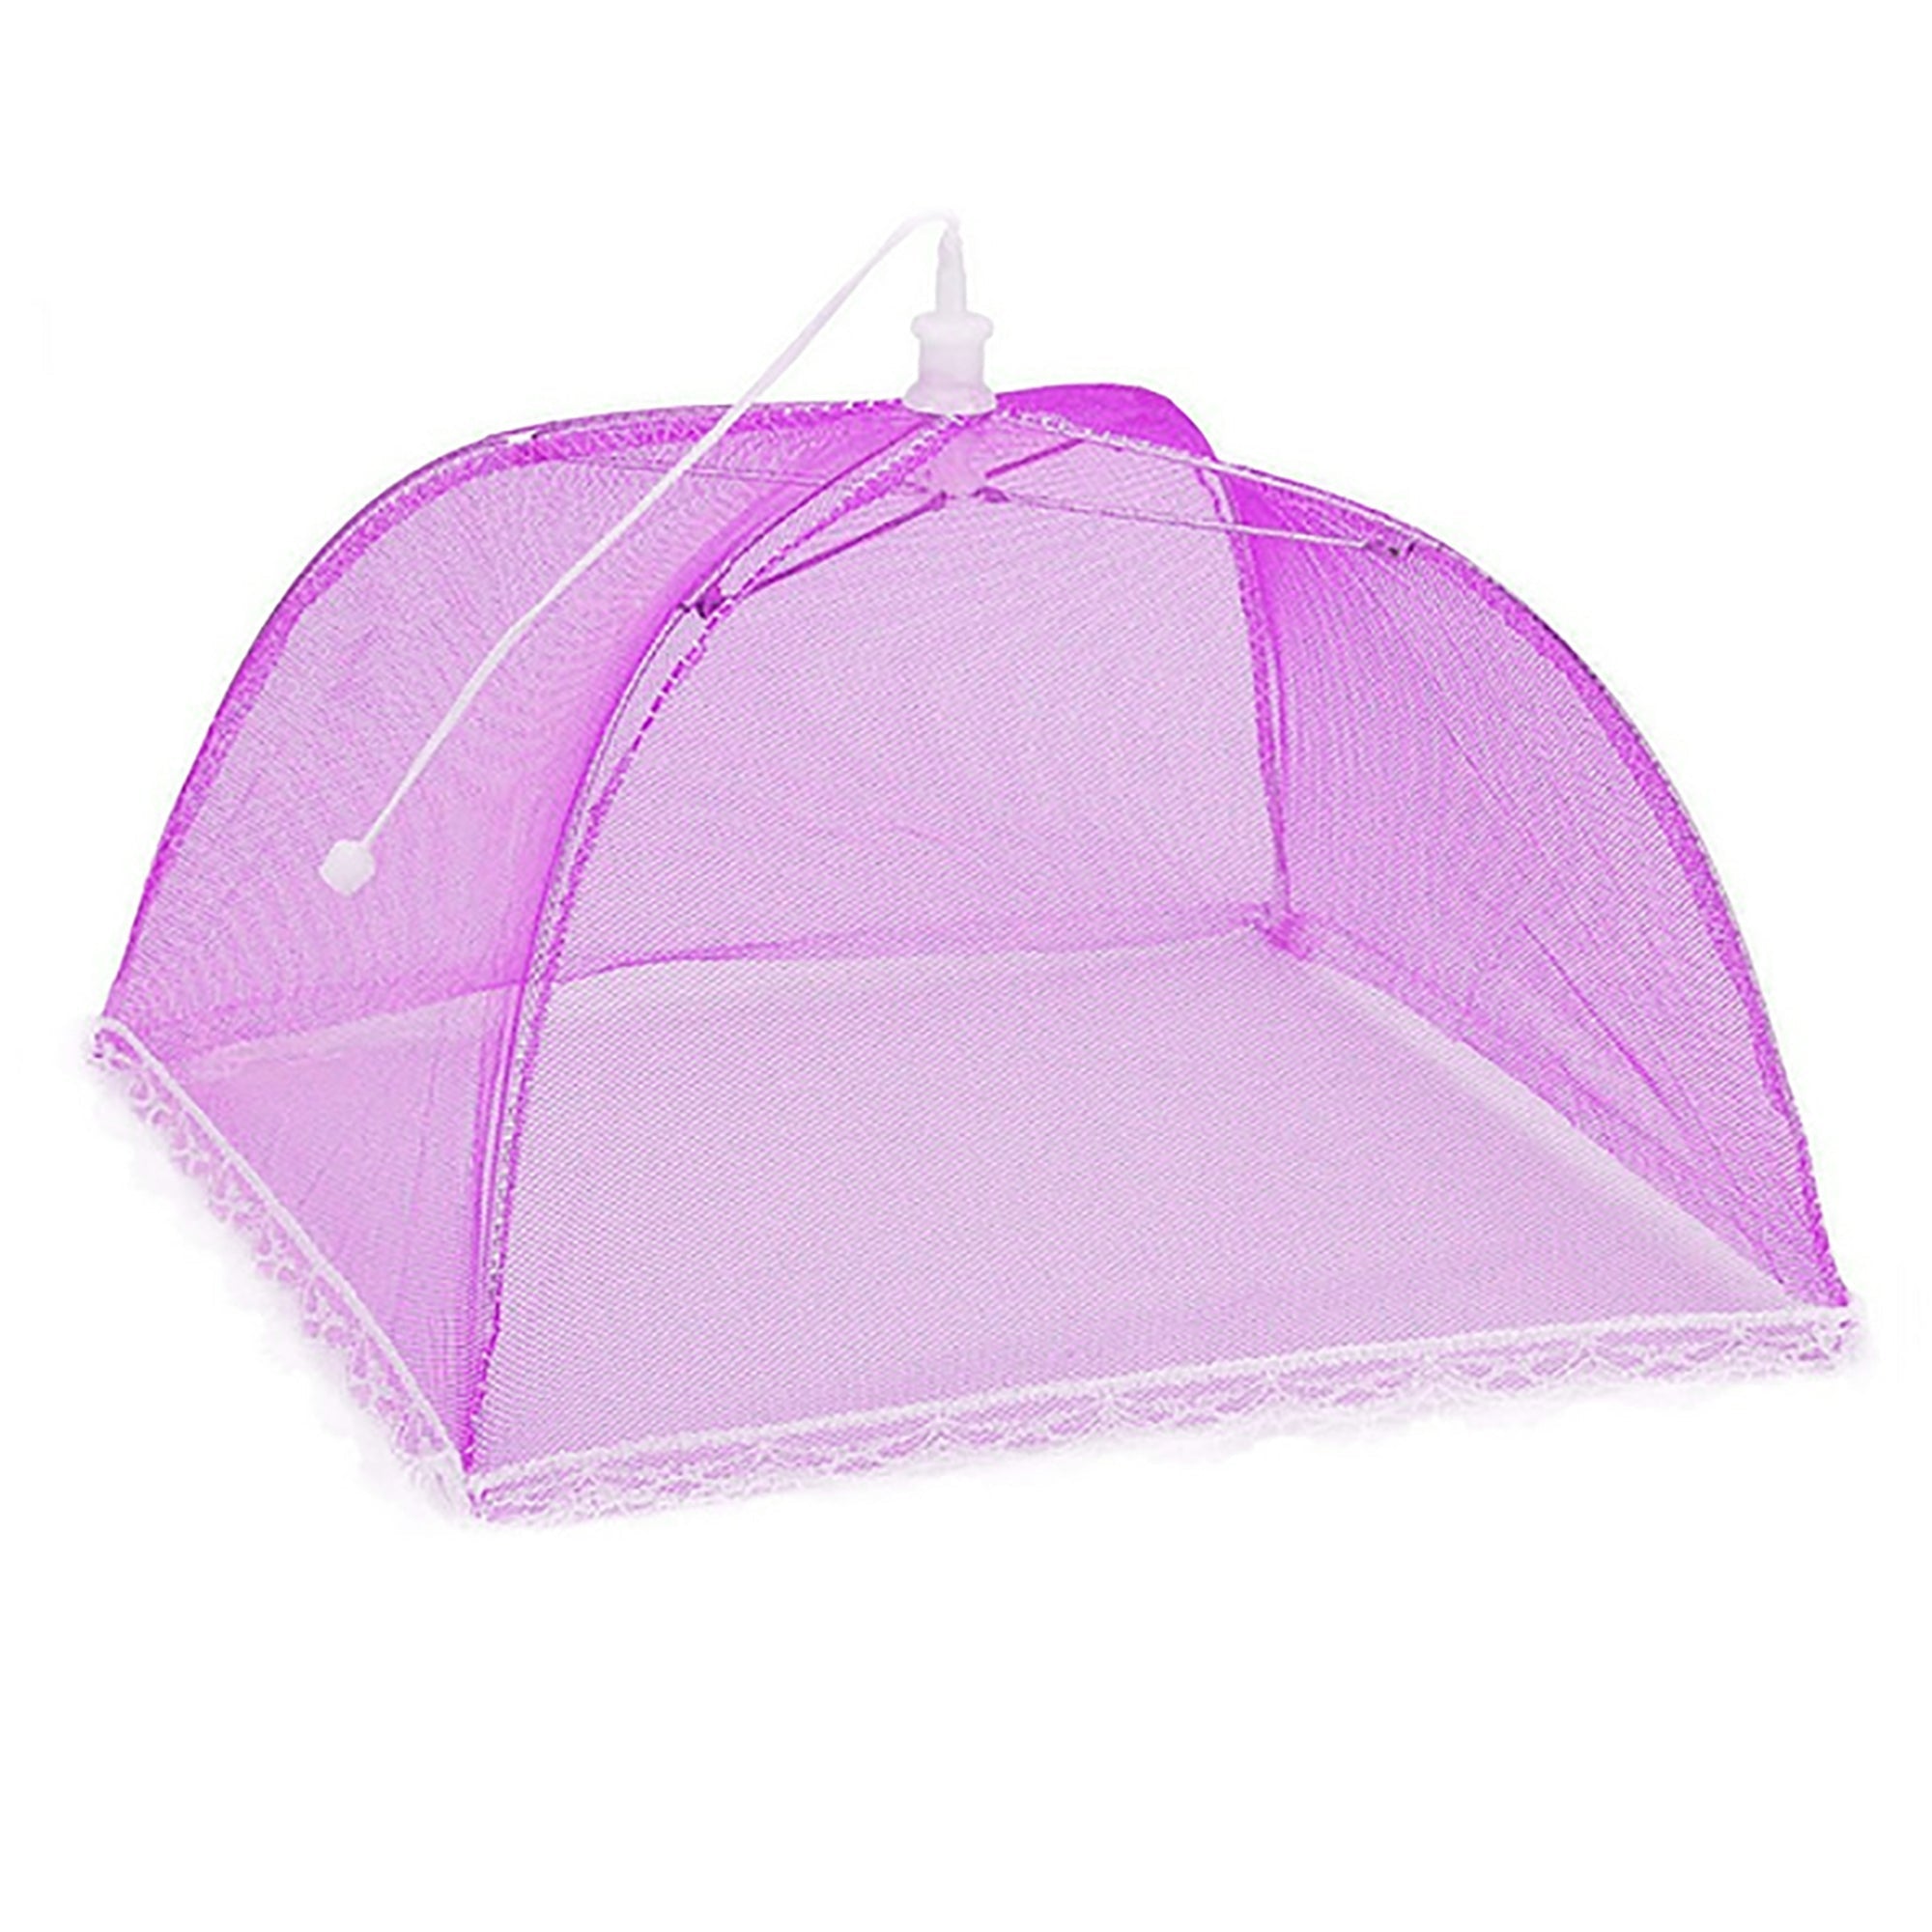 2280 Food Covers Mesh Net Kitchen Umbrella Practical Home Using Food Cover (Multicolour) DeoDap